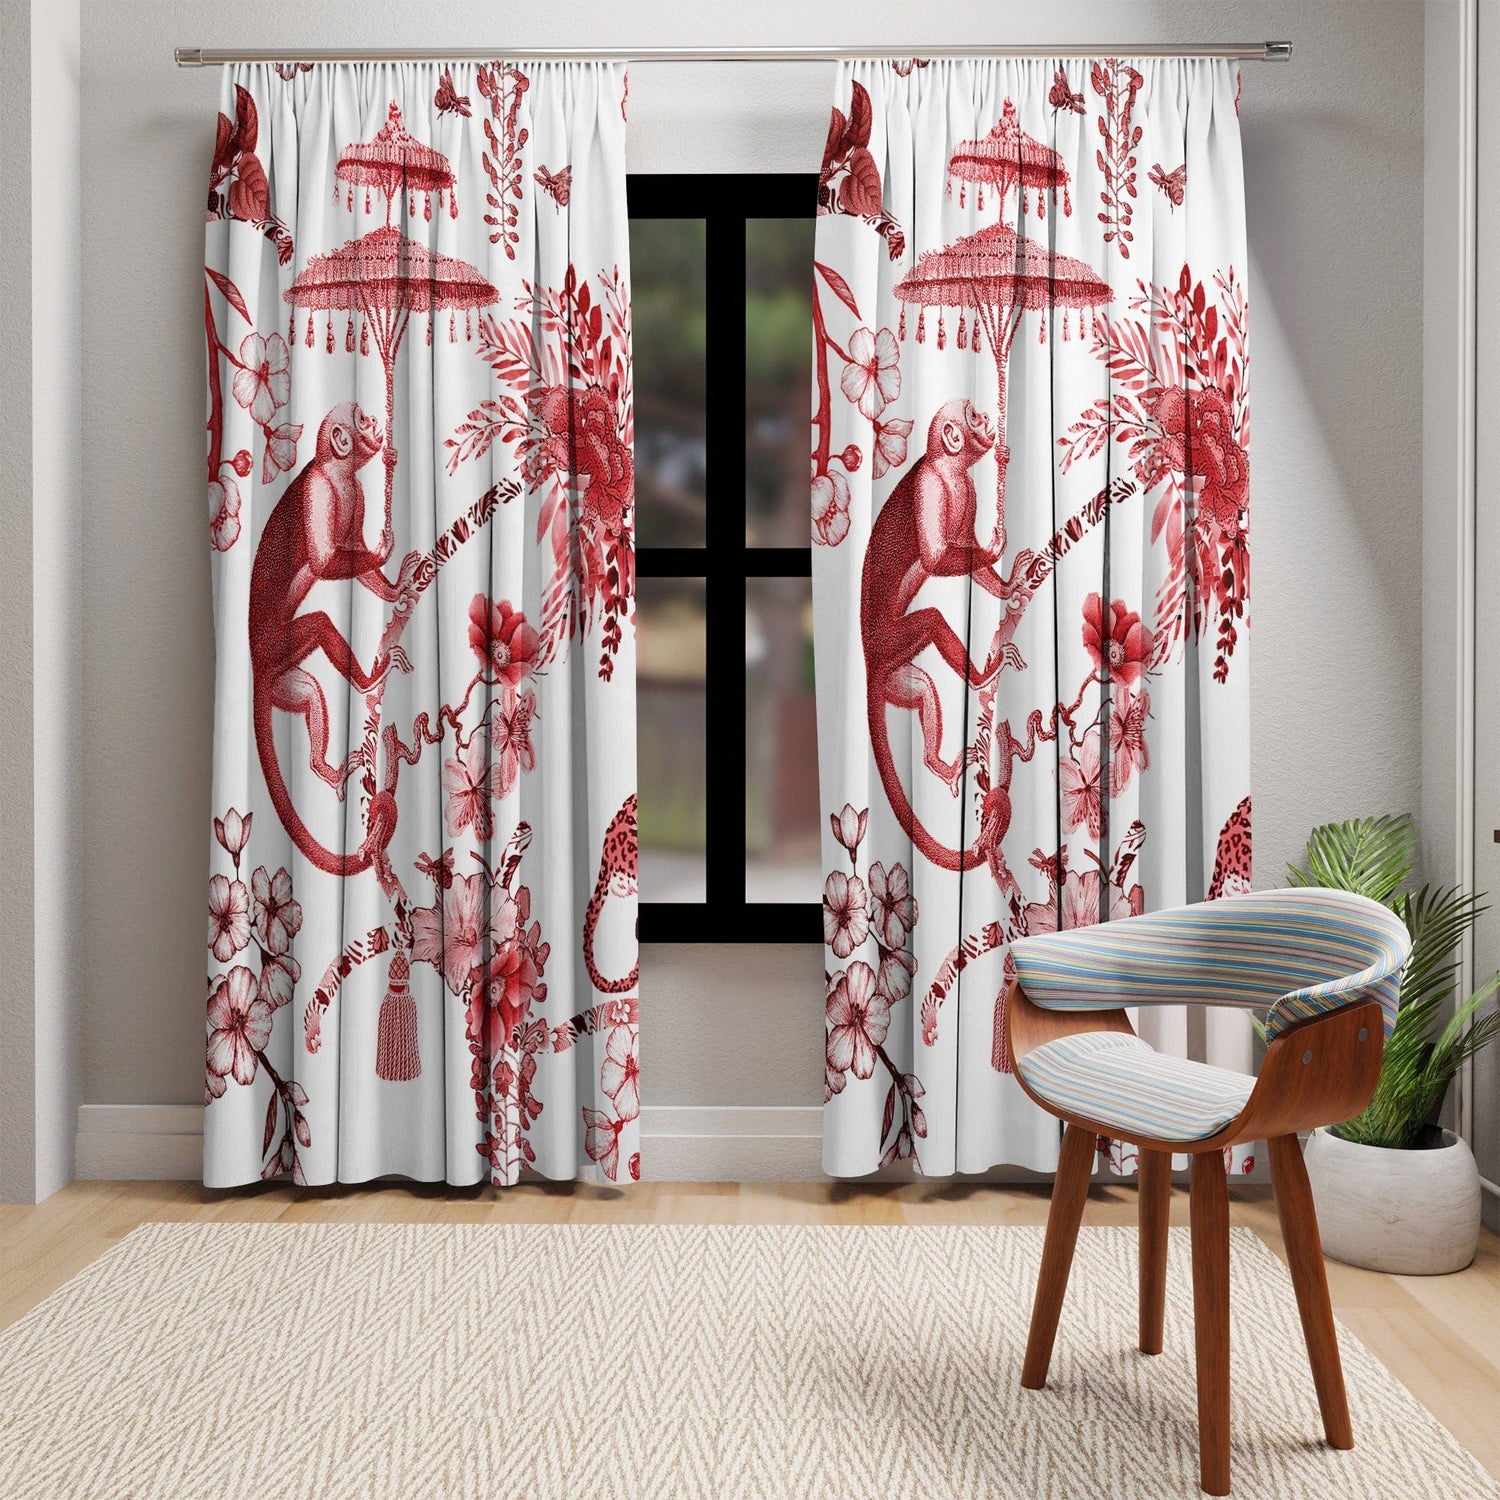 Kate McEnroe New York Chinoiserie Jungle Botanical Toile Window Curtains, Red, White Chinoiserie Floral Drapes, Country Farmhouse Decor - 131482623 Window Curtains